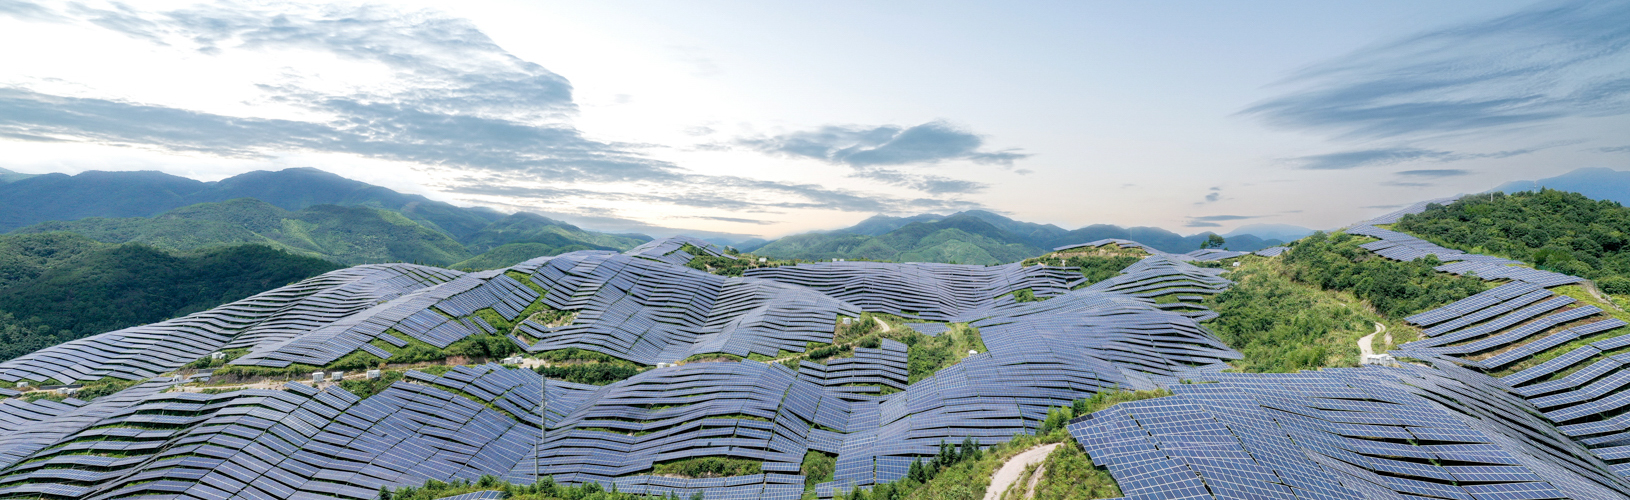 Solar panels in a field, depicting the latest ESG technology